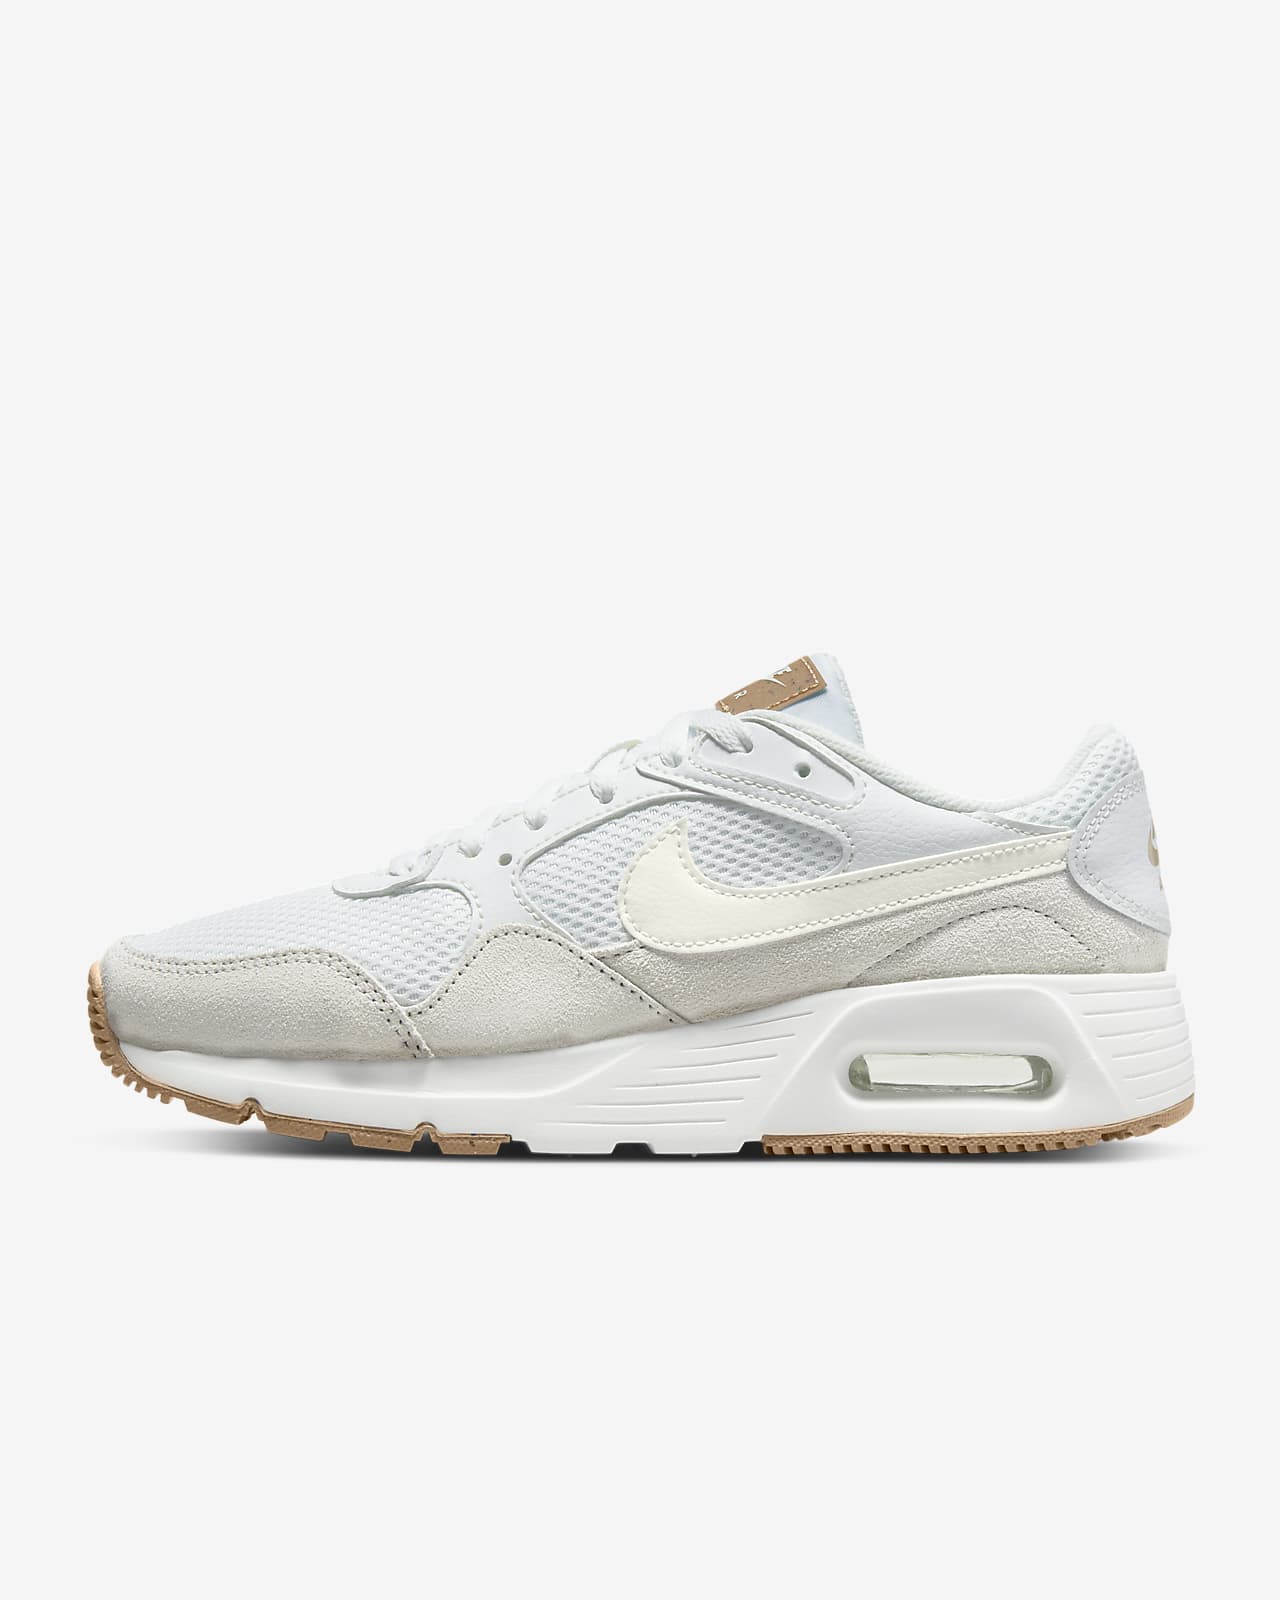 Nike Air Max SC Womens Shoes Review